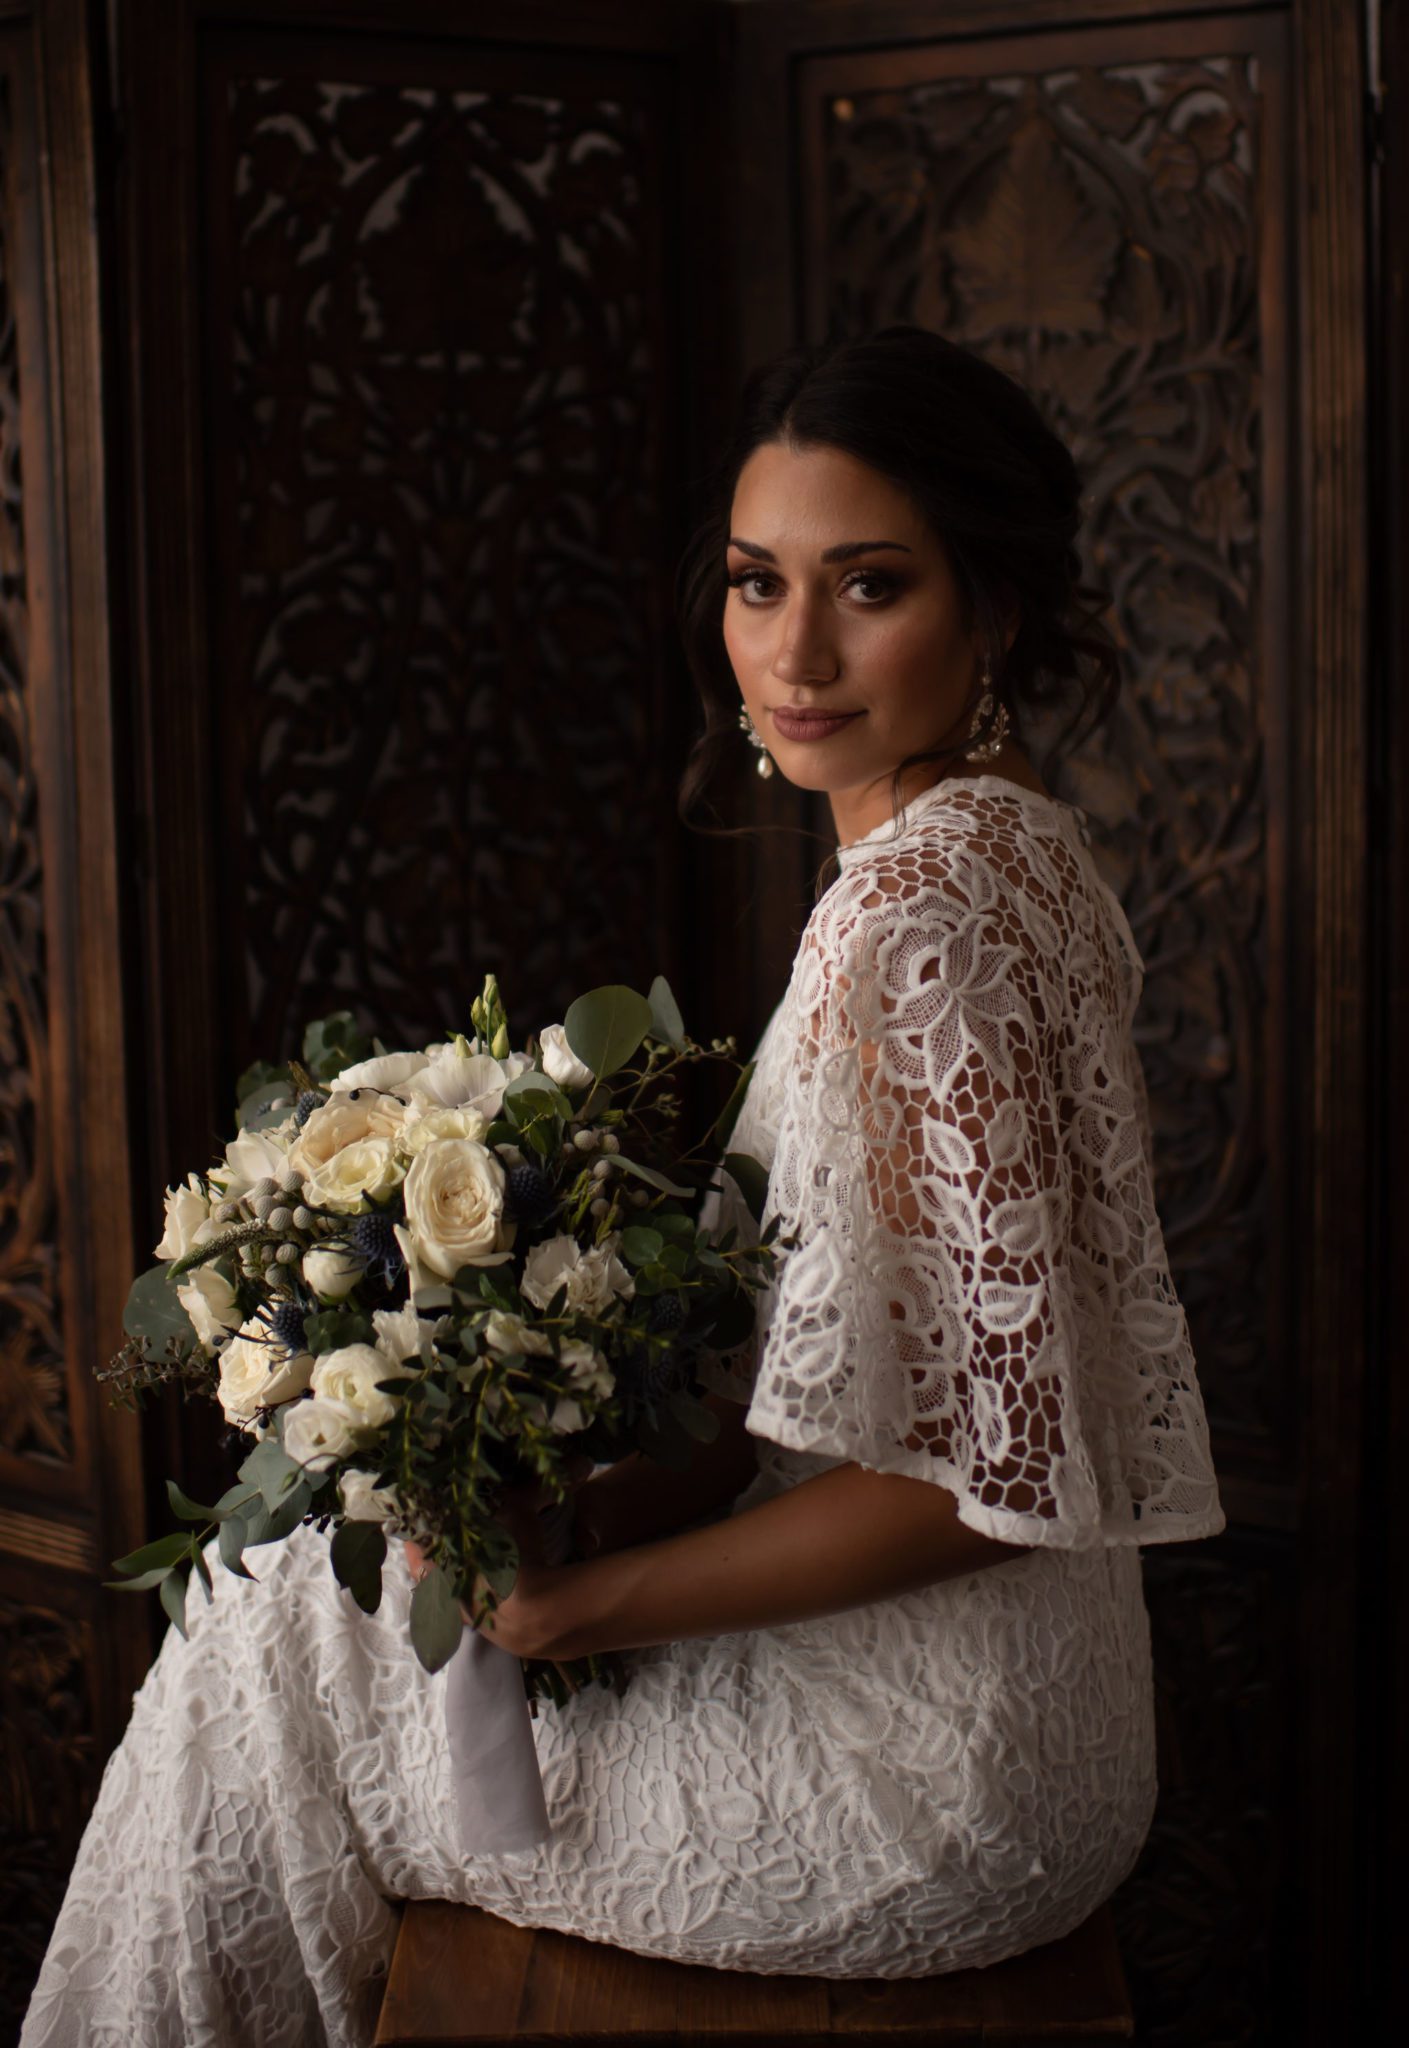 Vintage inspired bride poses in front of an ornate hand carved wooden panel